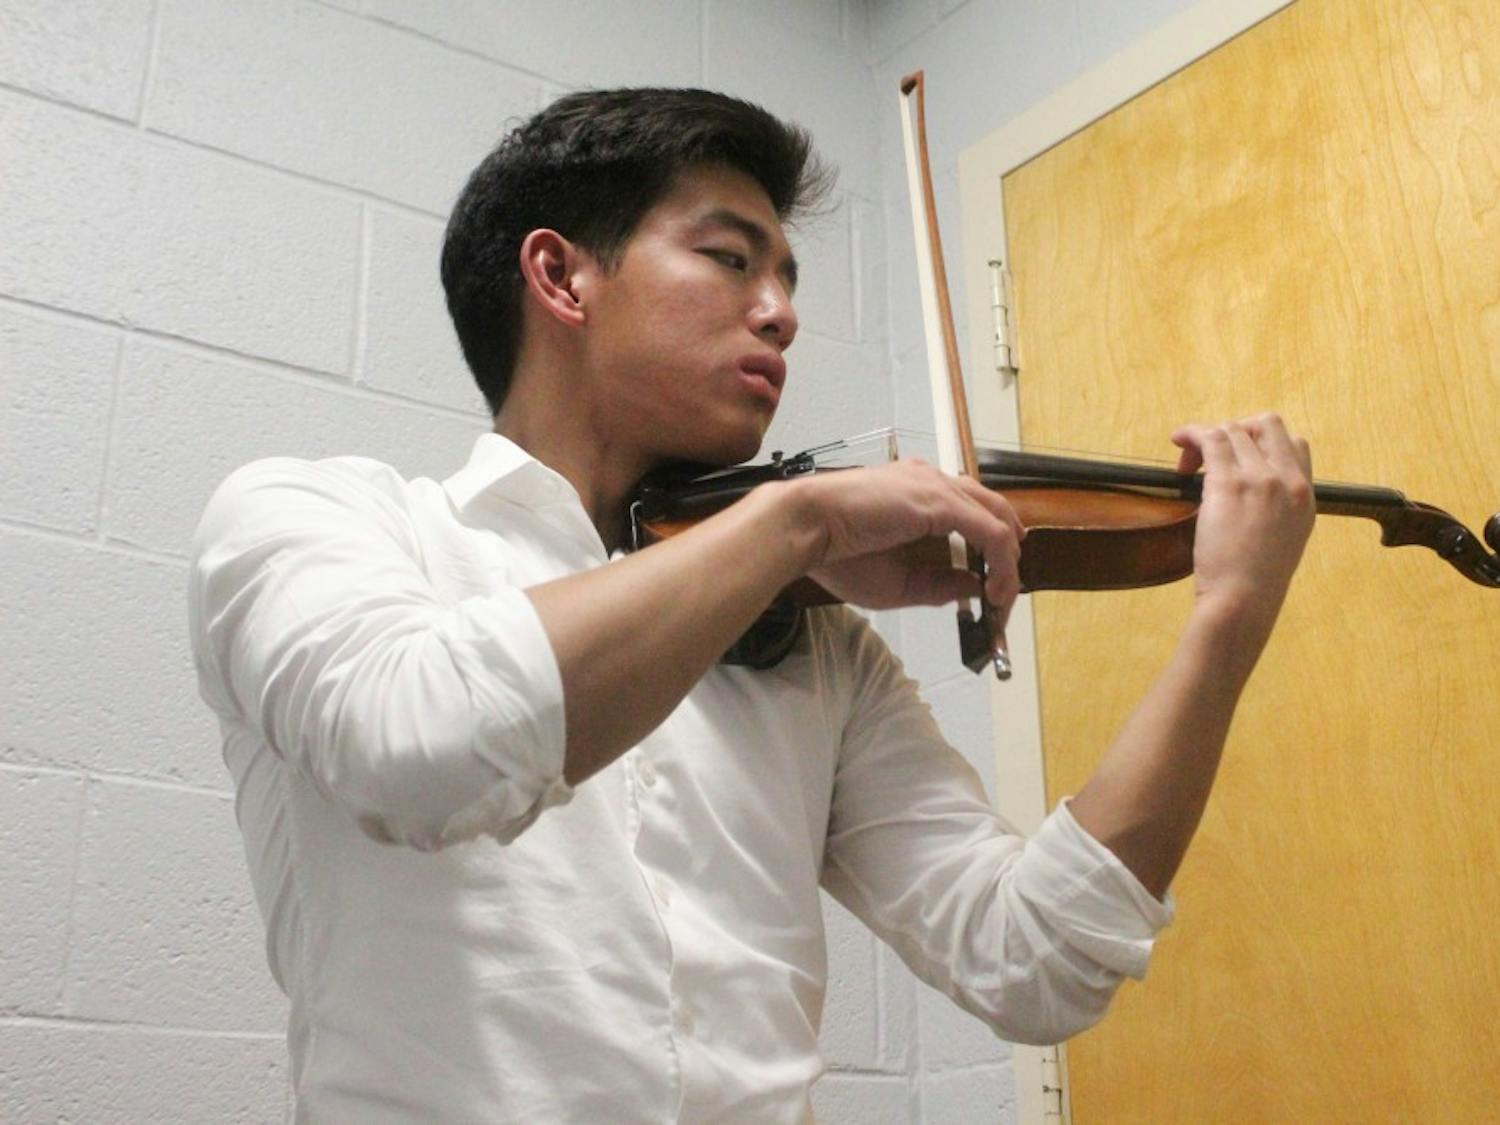 Junior biology major Thoai Vu practicing the violin in Hill Hall on Tuesday, Oct. 22, 2019. Vu is the president and founder of Heeling in Harmony. Vu said that the club "aims to promote healing and improve quality of life through music and music related activities."